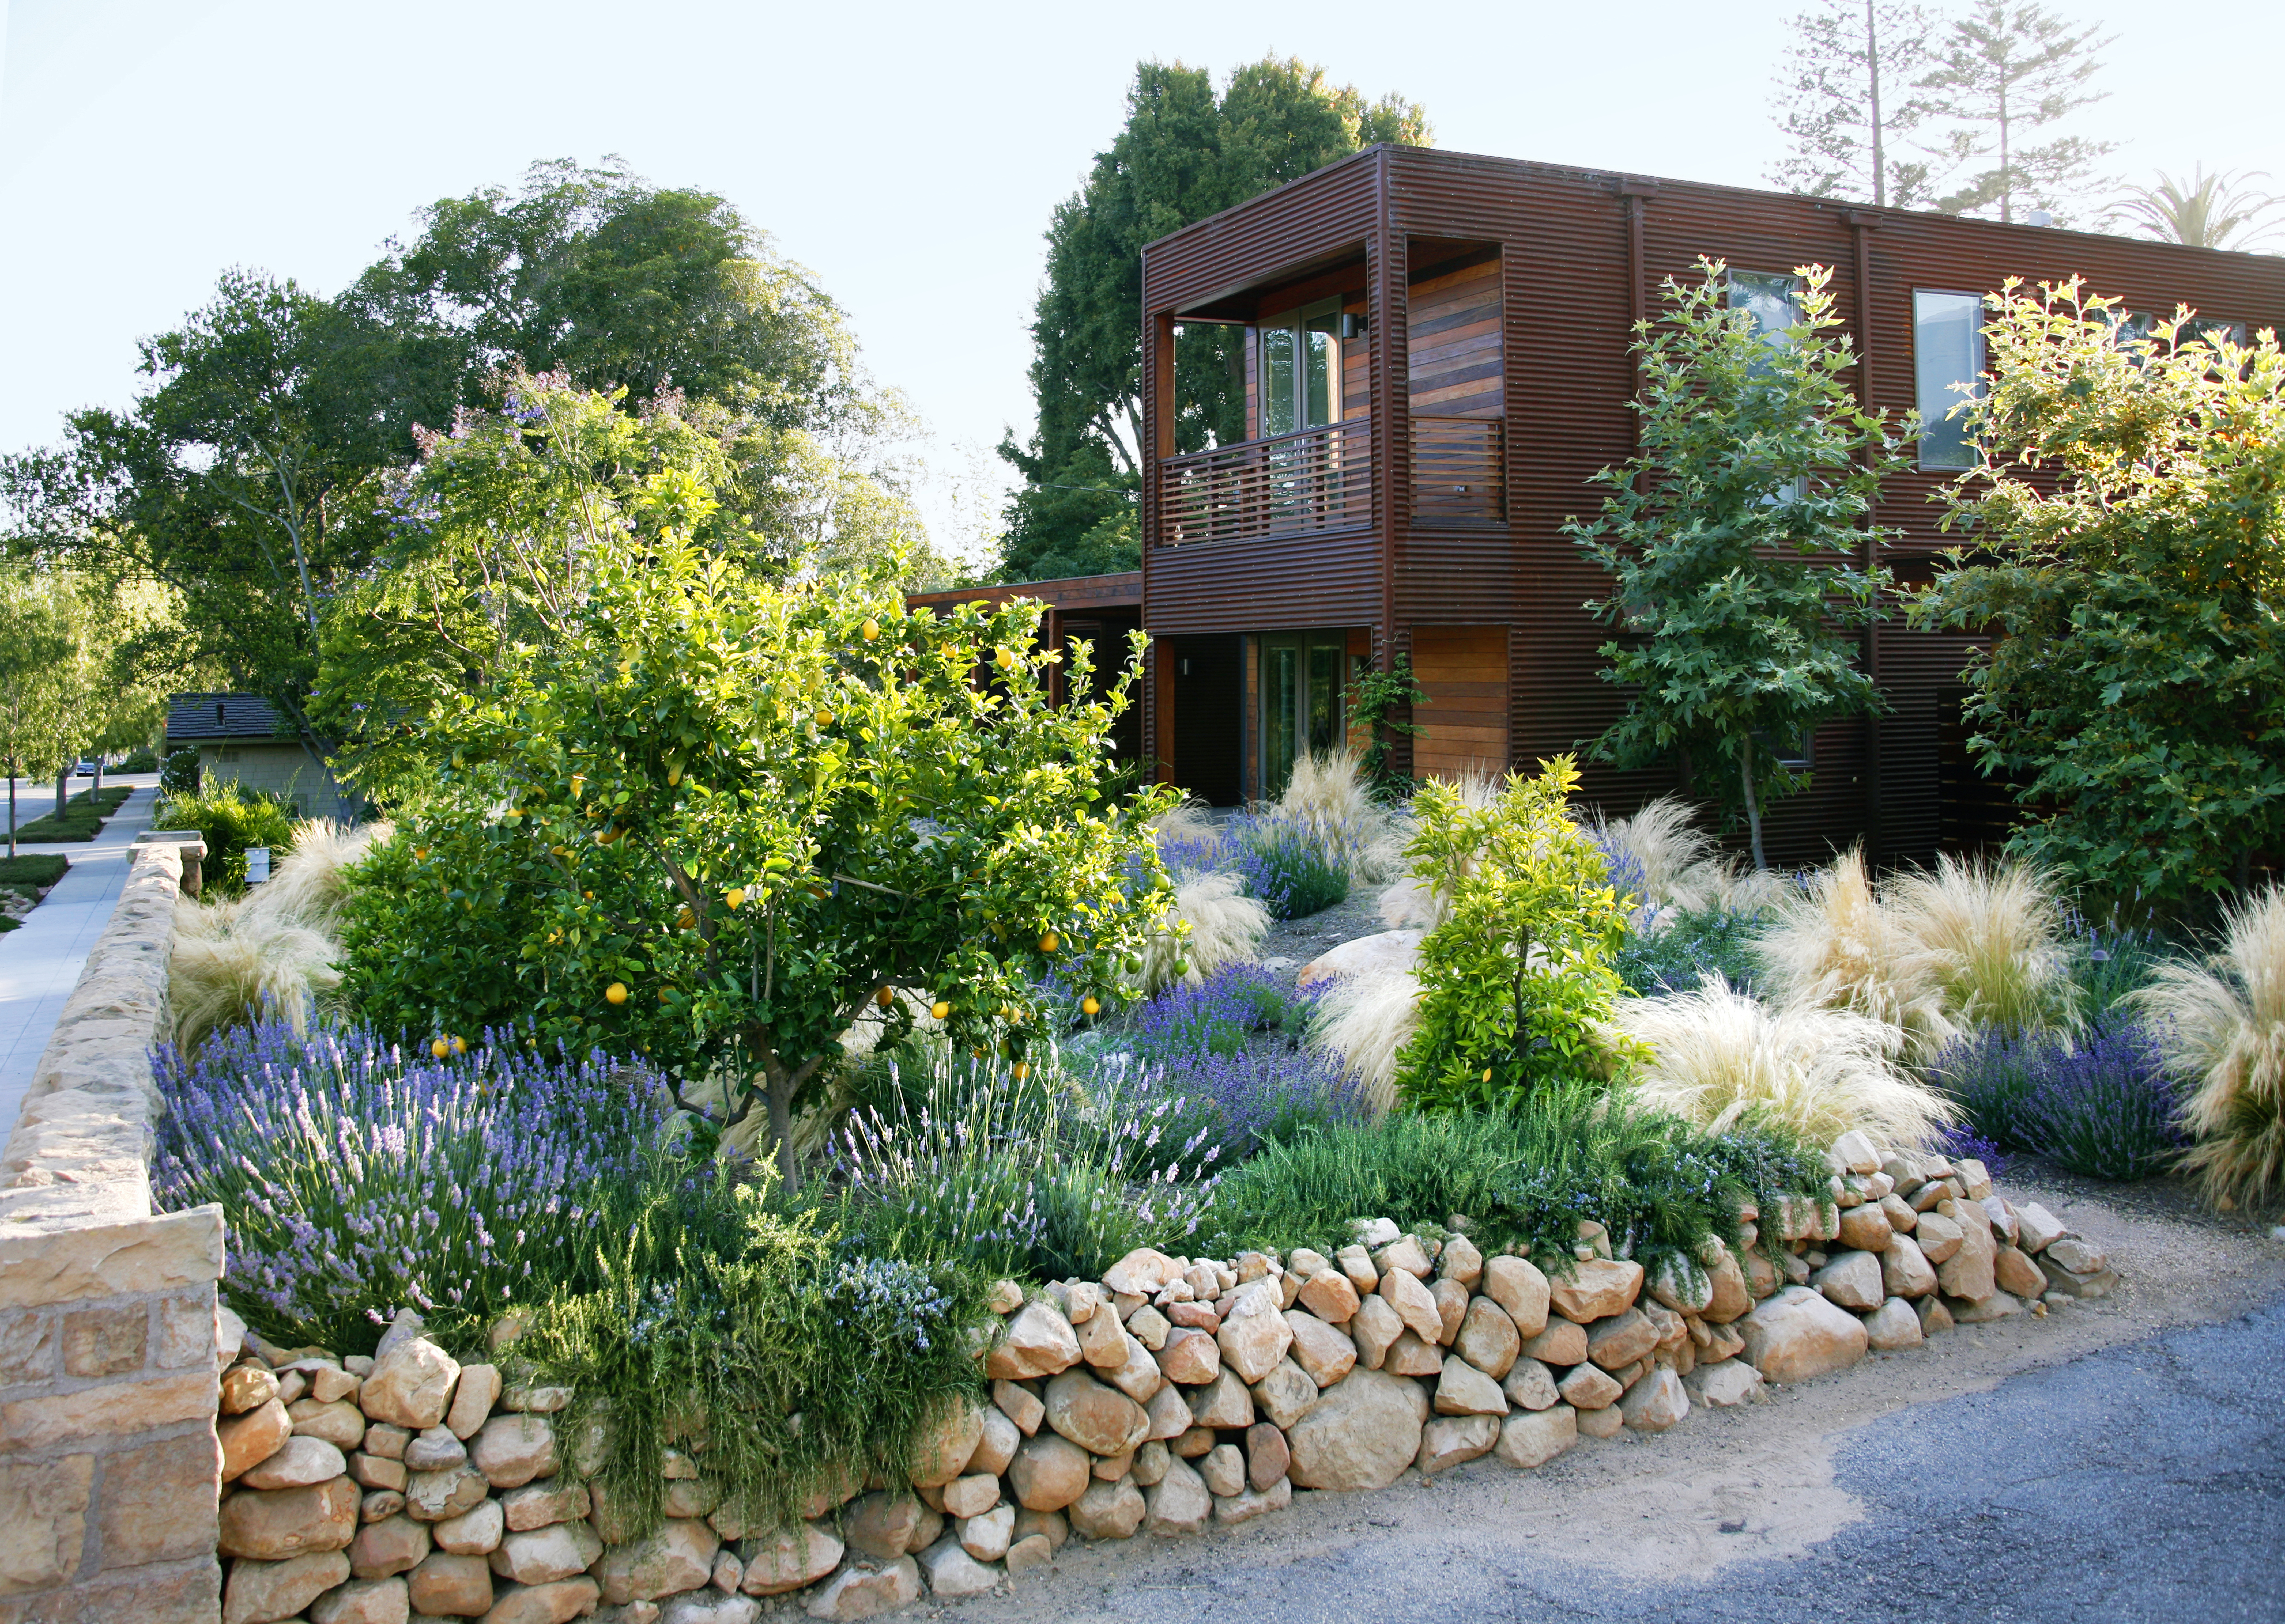 Designing With Drought Resistant Plants, Cost Of Drought Tolerant Landscaping